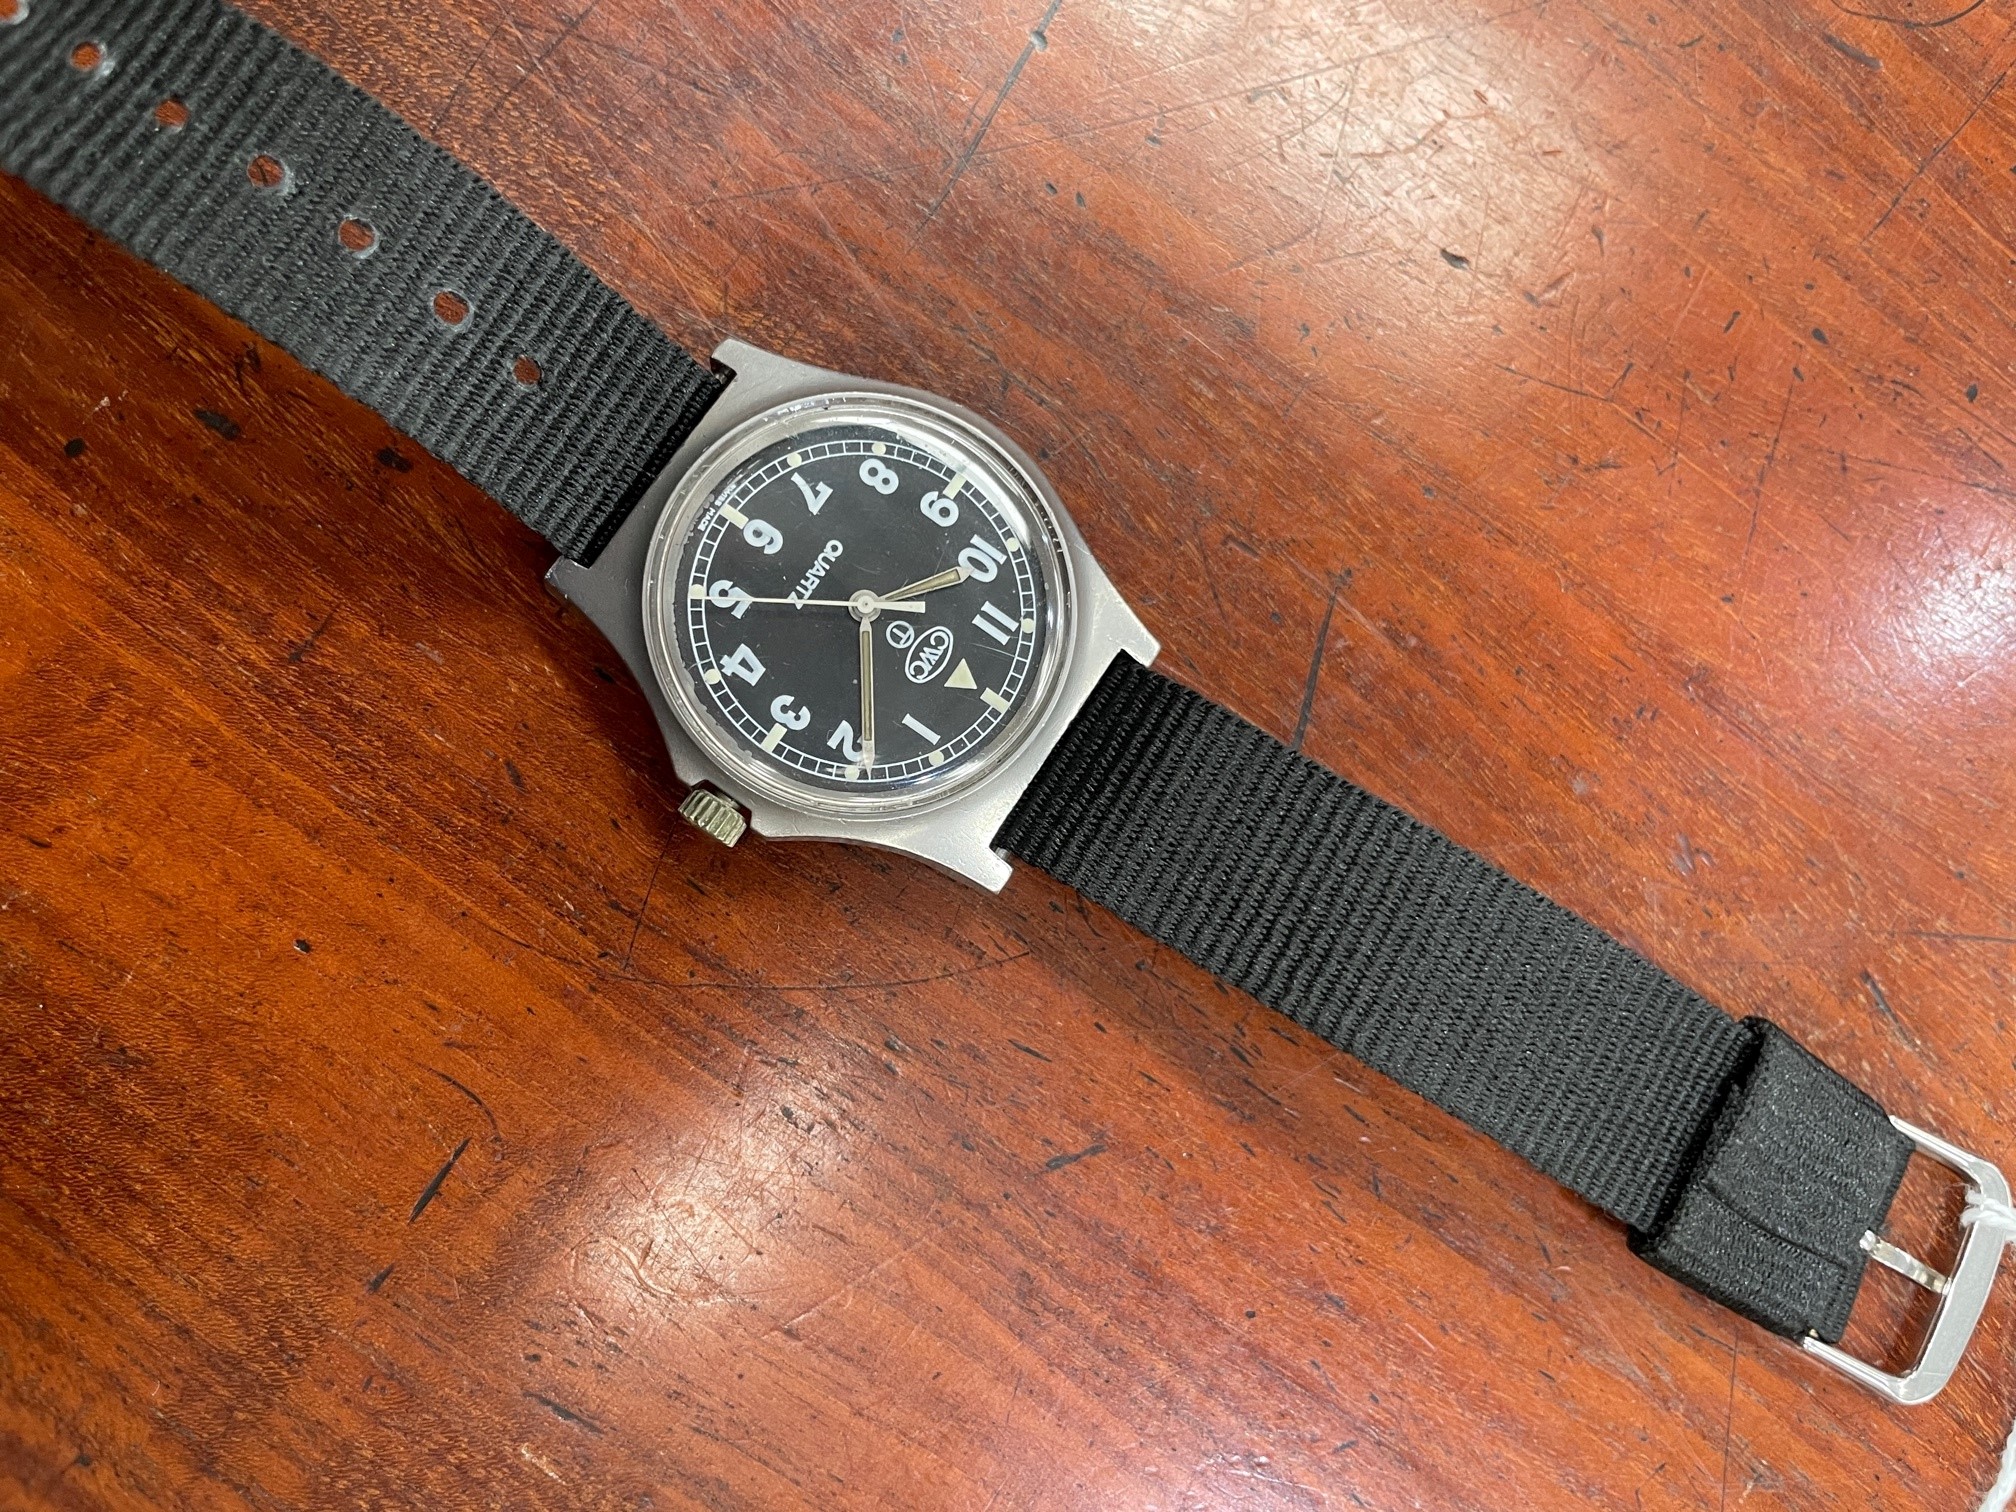 A CWC ROYAL NAVY ISSUE G10 WATCH - Image 6 of 7